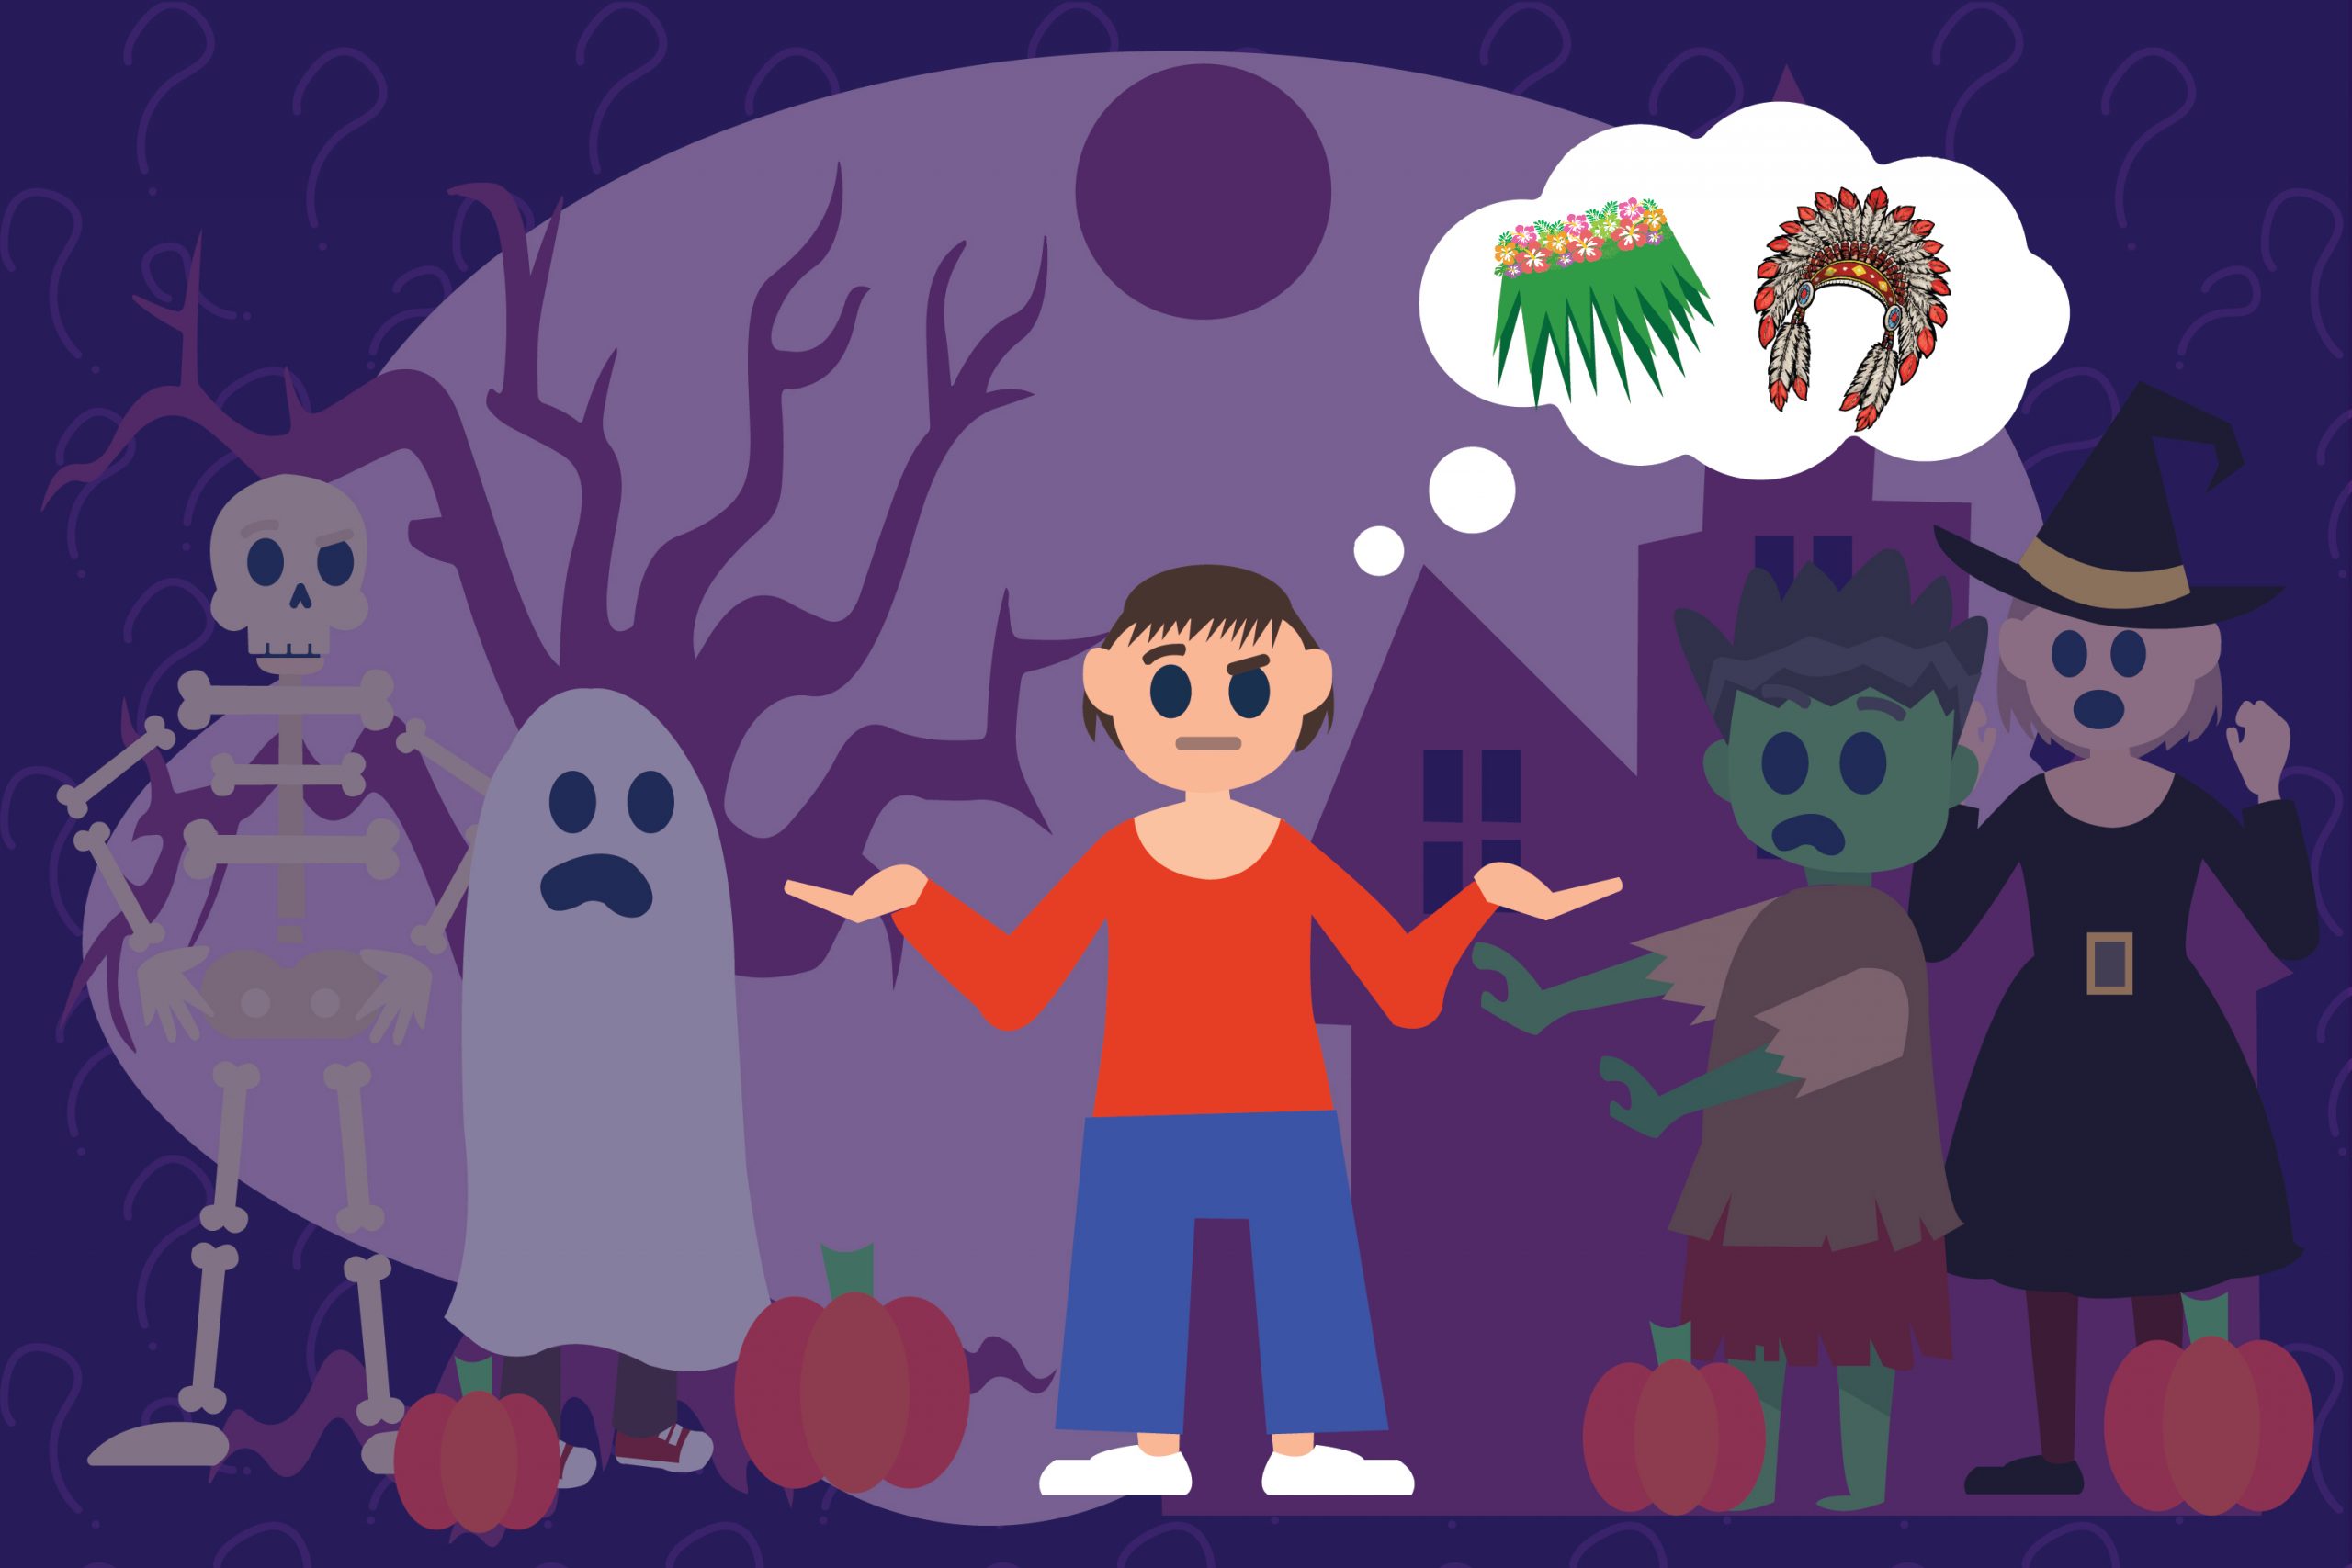 A man stands before a Halloween scene featuring a ghost, a witch, a skeleton and a zombie. He contemplates costumes that exhibit cultural appropriation.